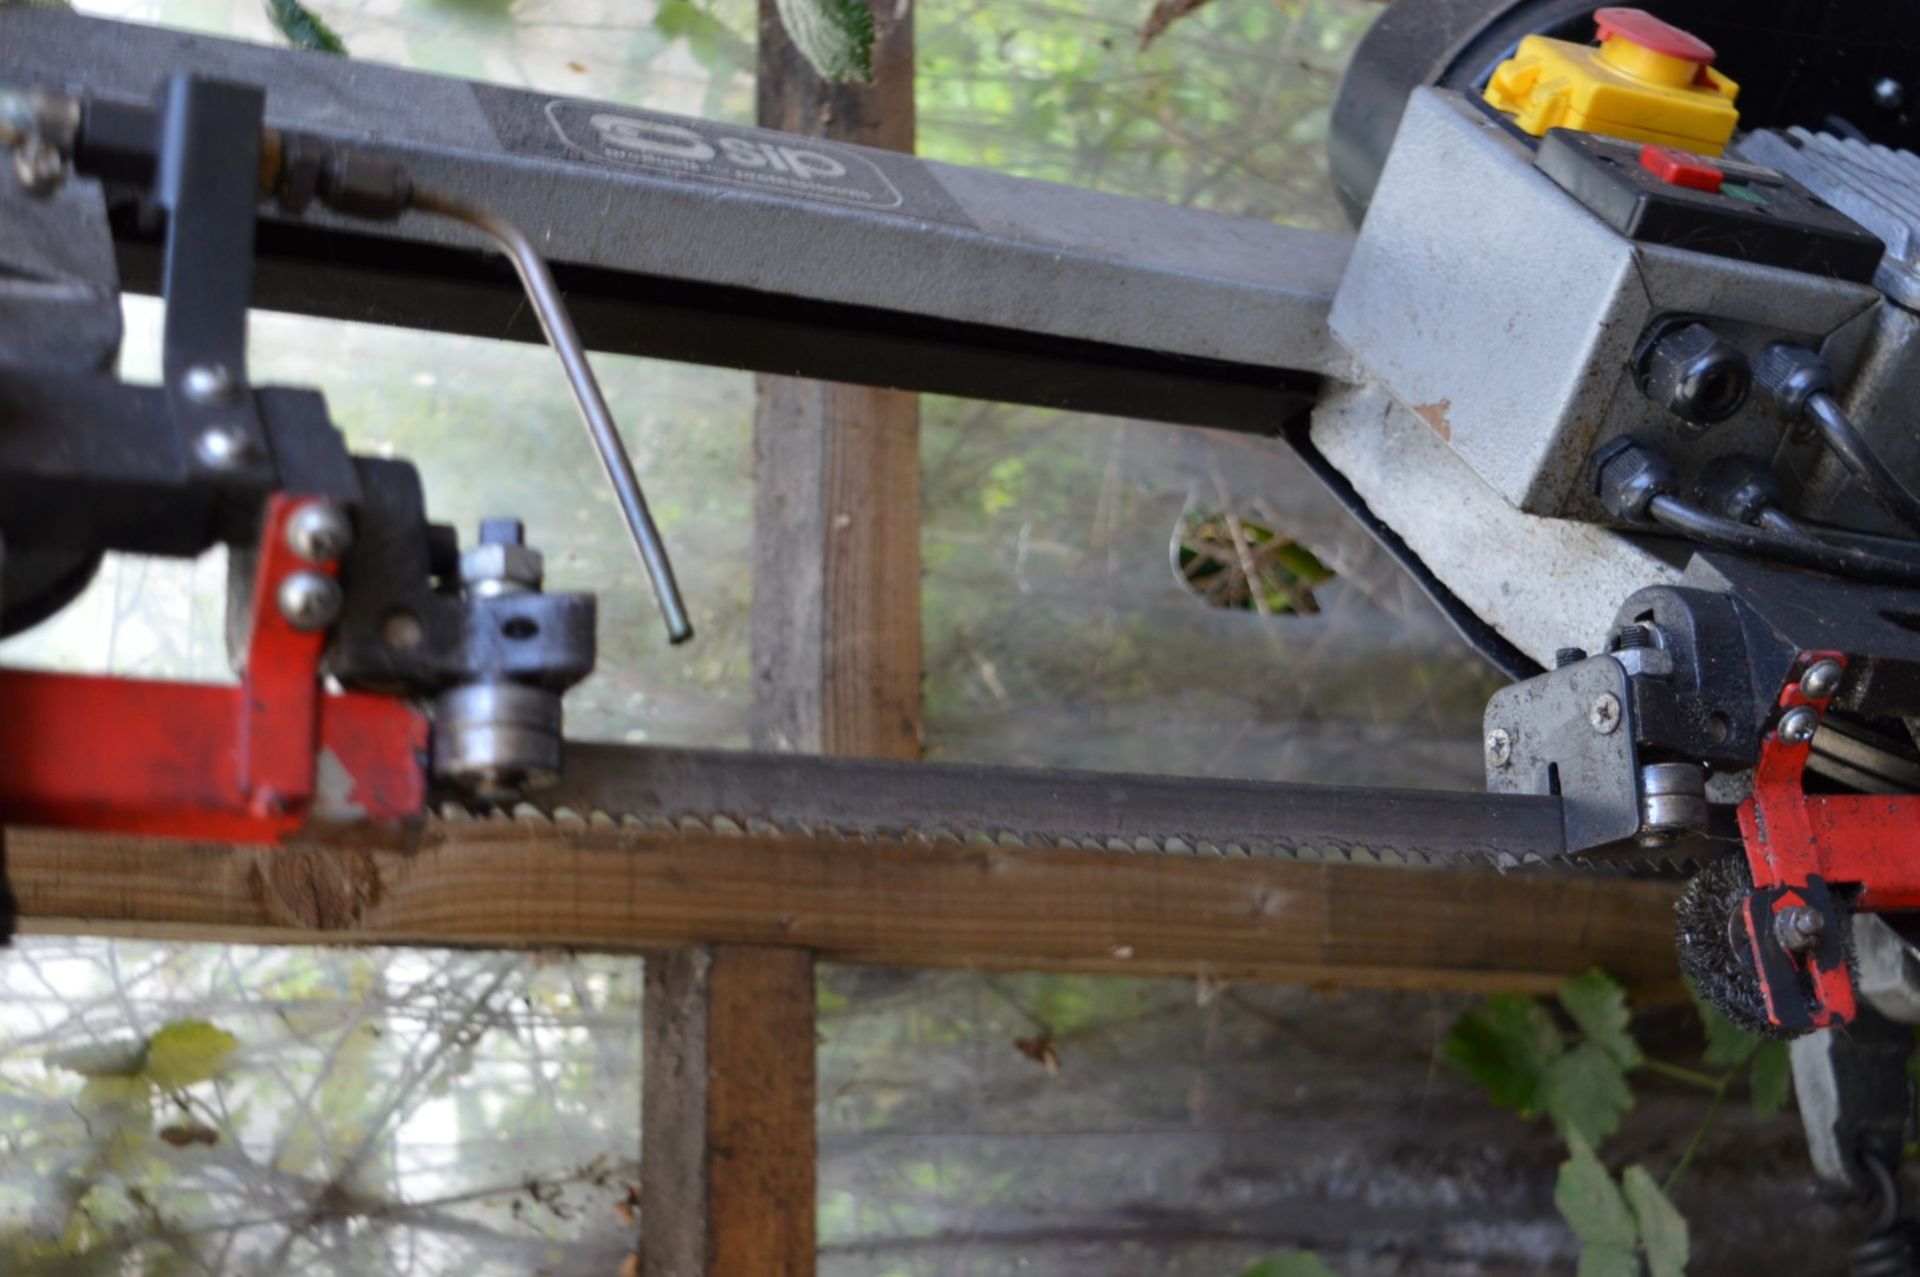 1 x Sip Trade Metal Cutting Band Saw - 12" X 7" - CL202 - Ref EN168 - Location: Worcester WR14 - Image 4 of 4